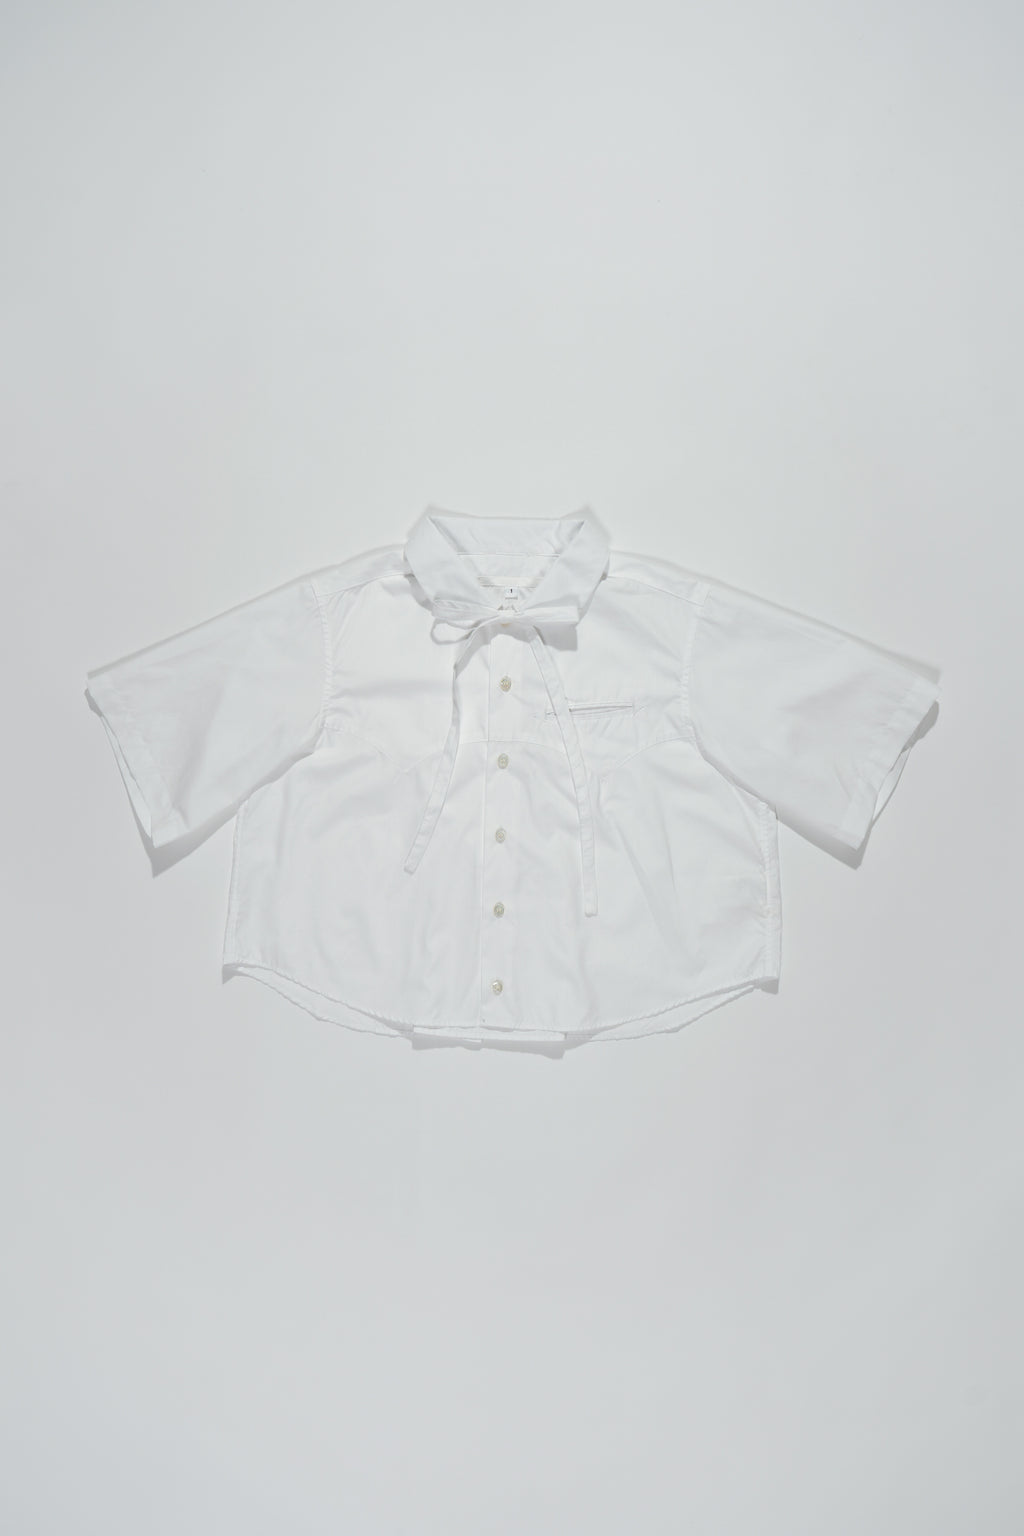 BLANK Crest Half Shirt - White 100's 2ply Broadcloth